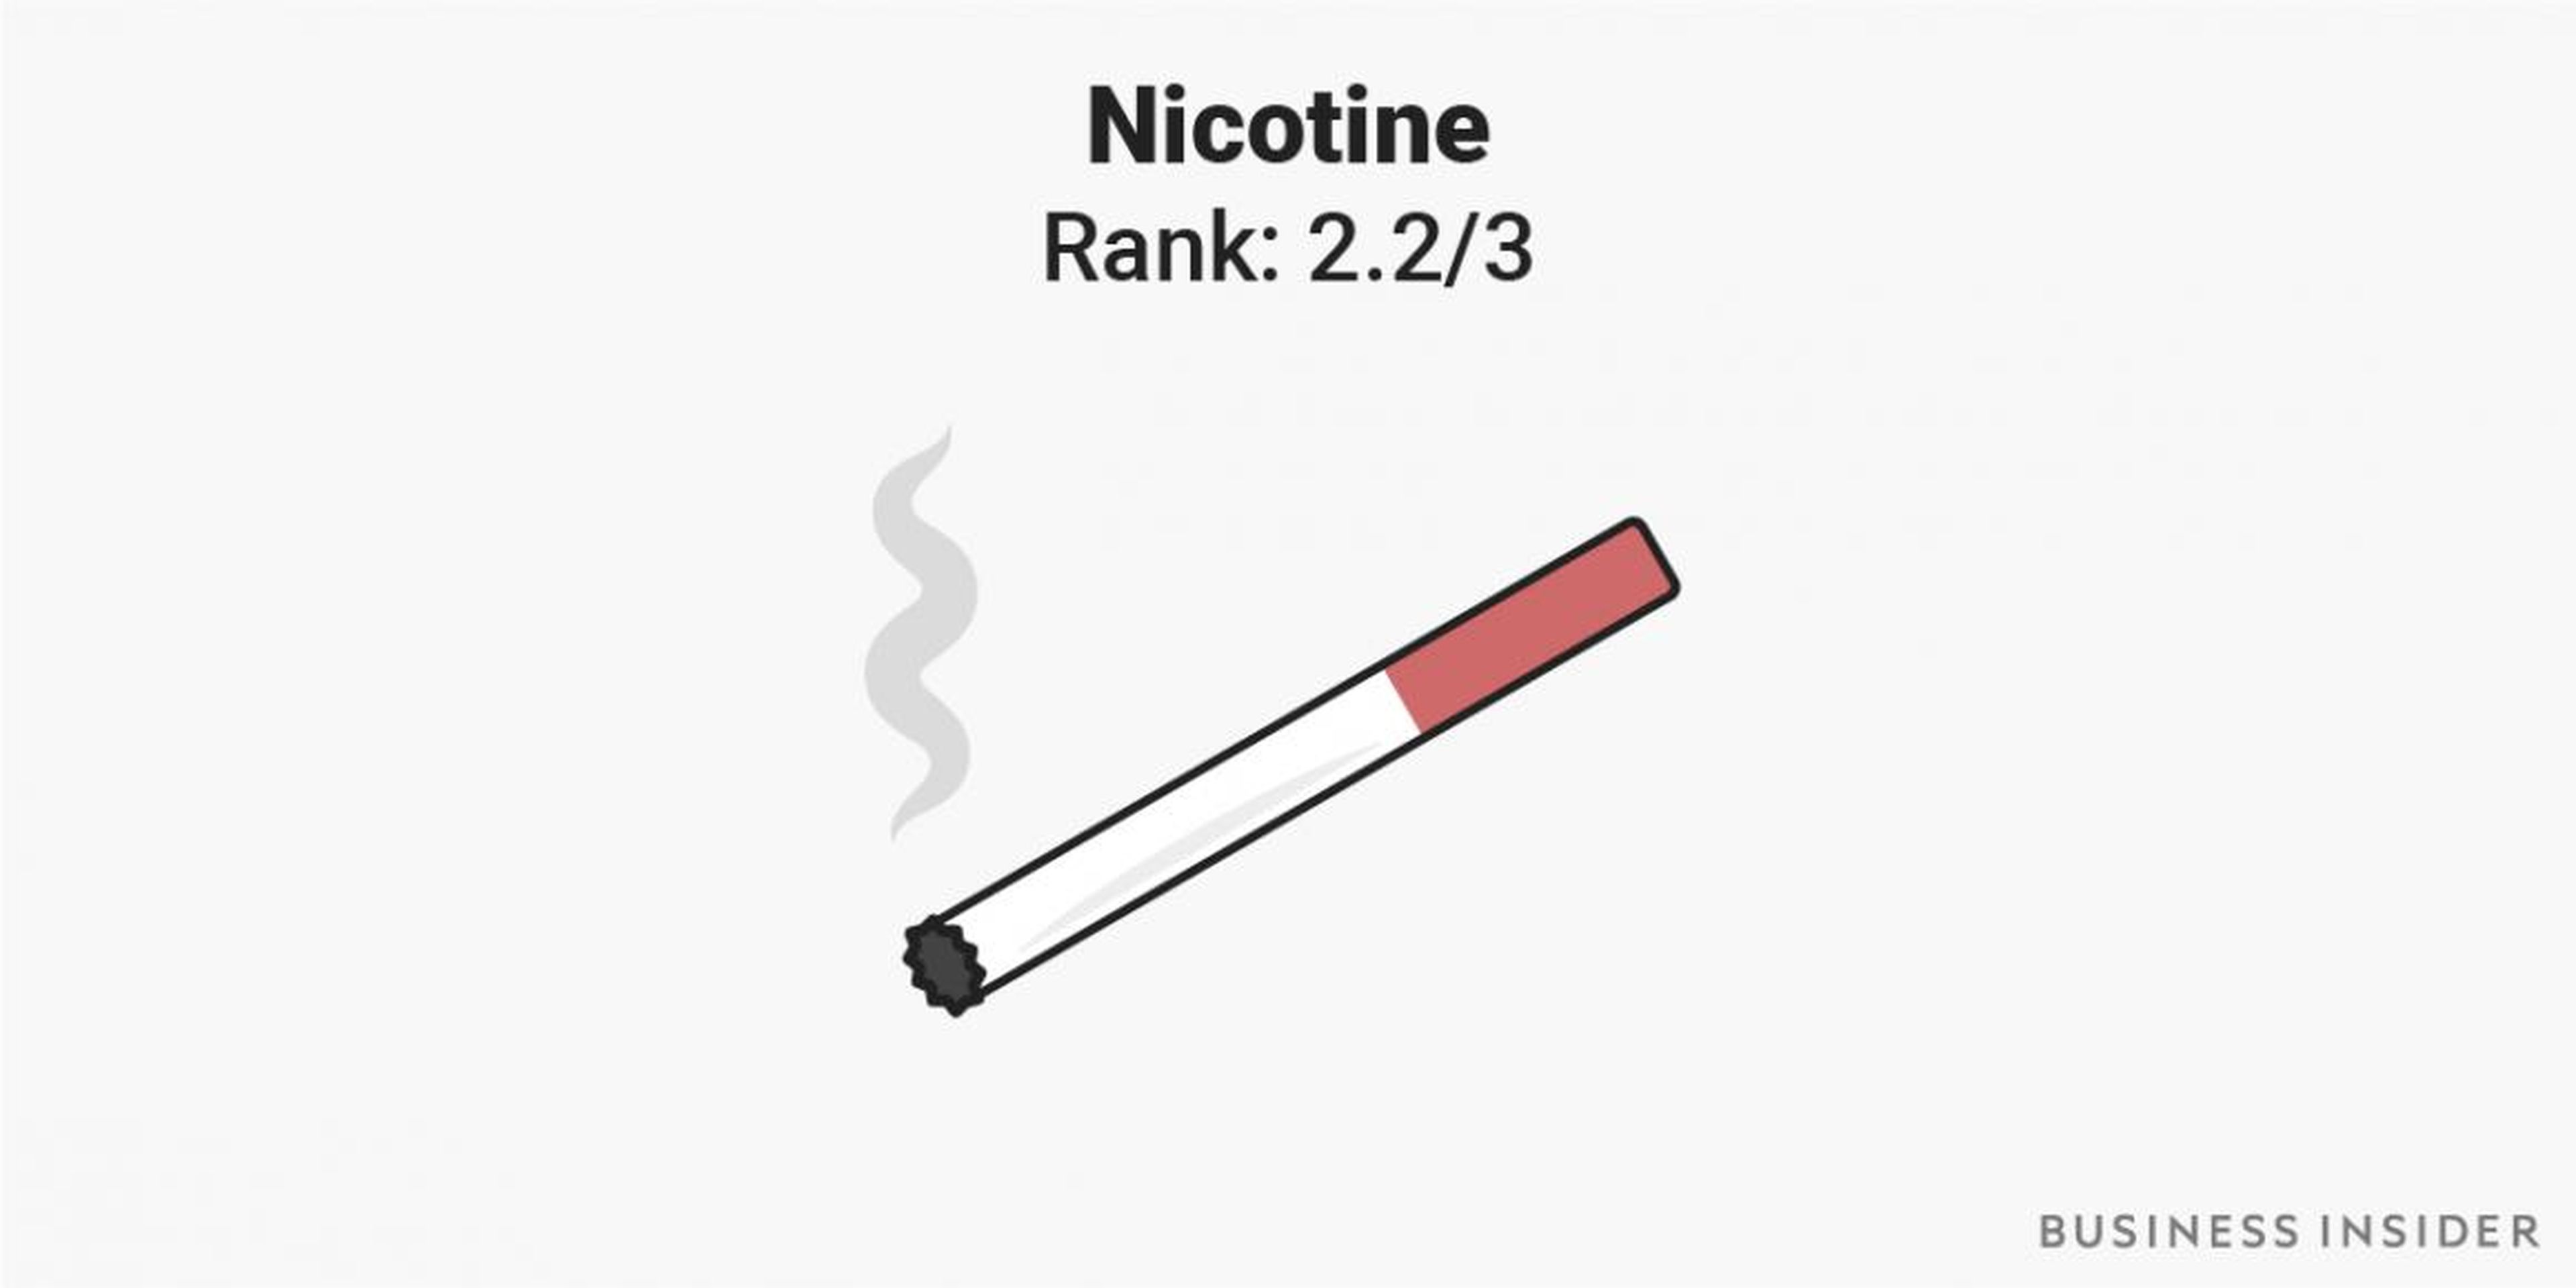 3. In terms of psychological addictiveness, nicotine was ranked as almost as addictive as cocaine.